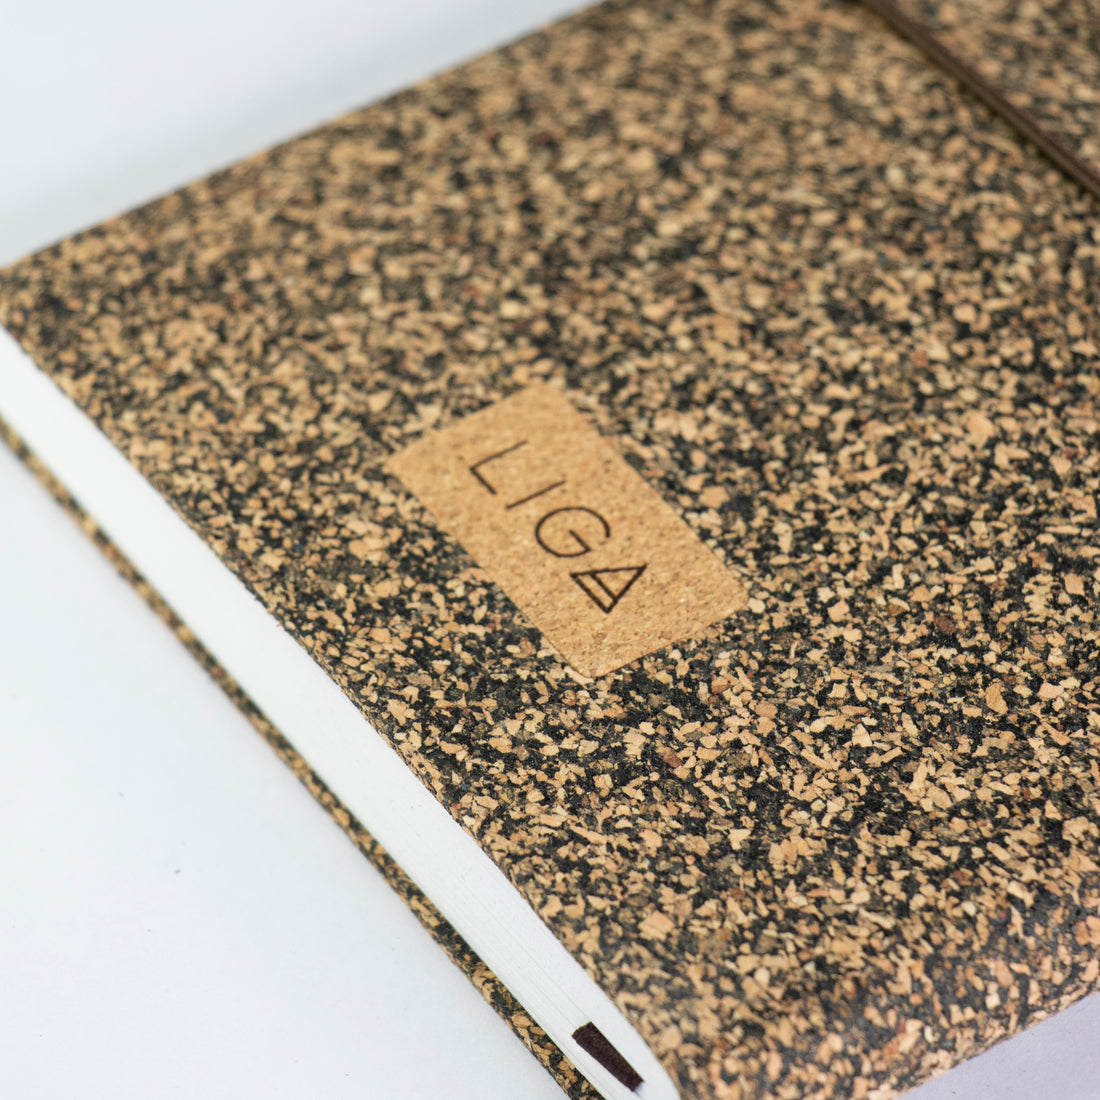 Sustainable Dash a5 Notebook